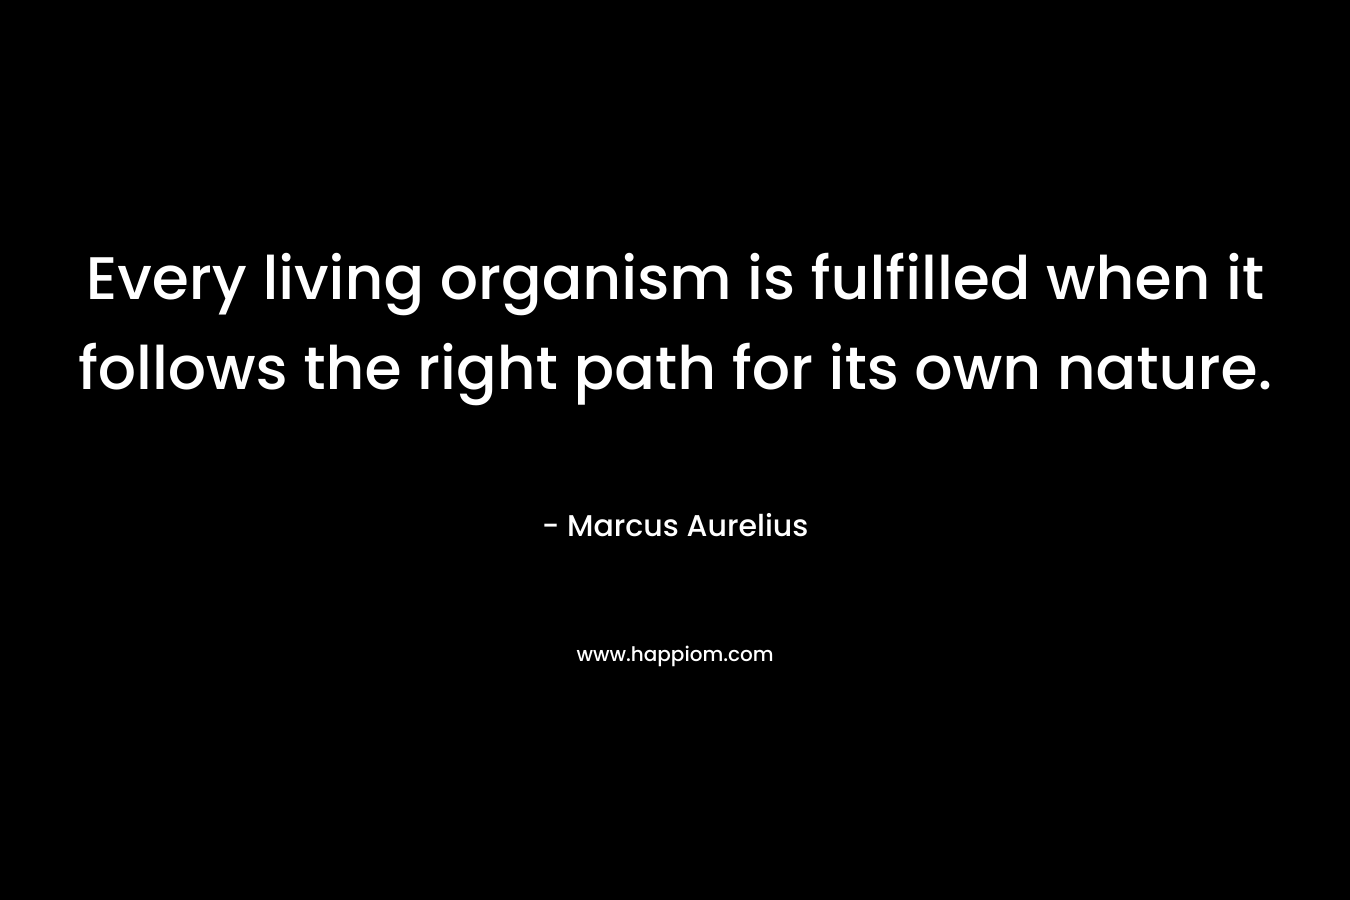 Every living organism is fulfilled when it follows the right path for its own nature. – Marcus Aurelius